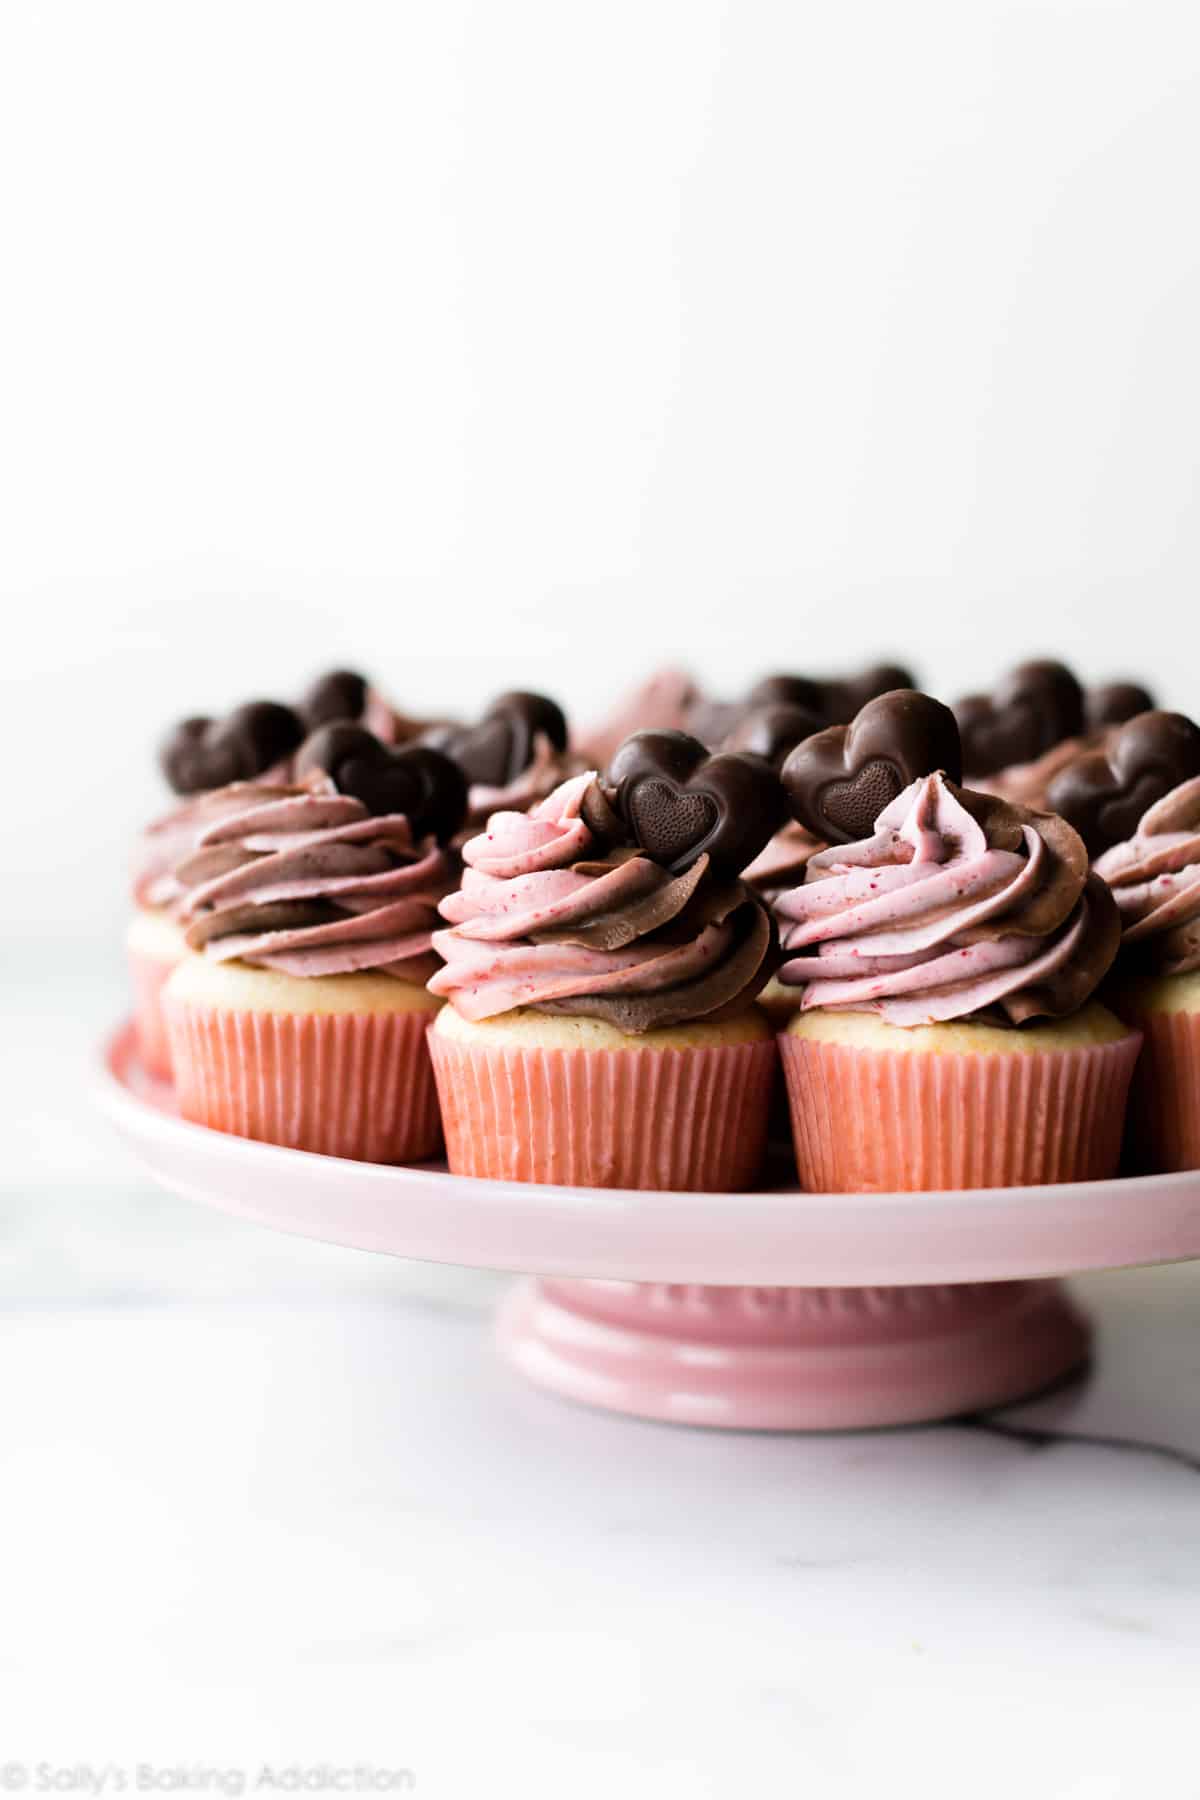 Strawberry Nutella frosted cupcakes on a pink cake stand